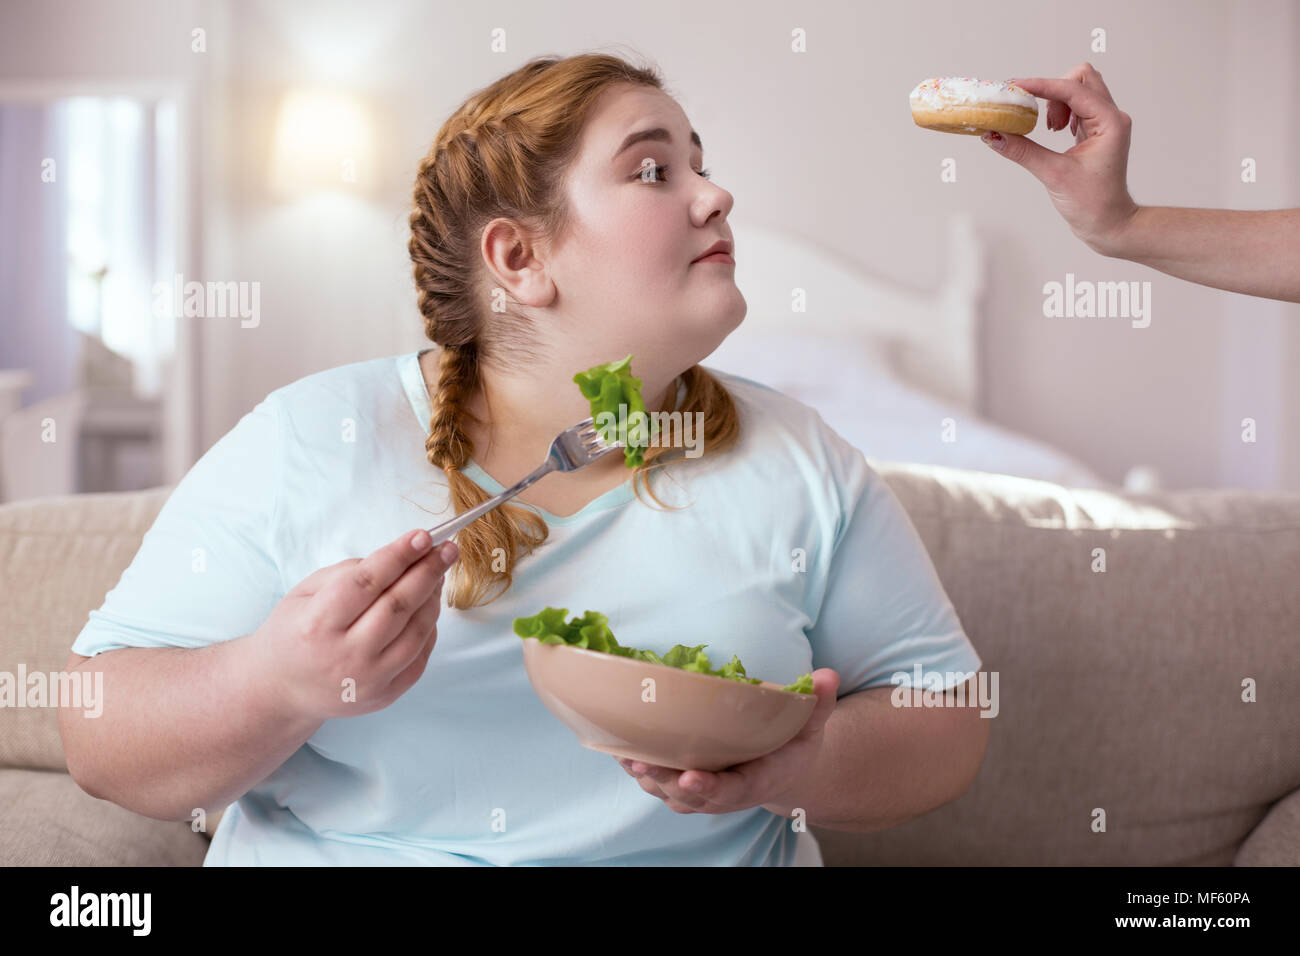 Sweet donut alluring young woman Stock Photo